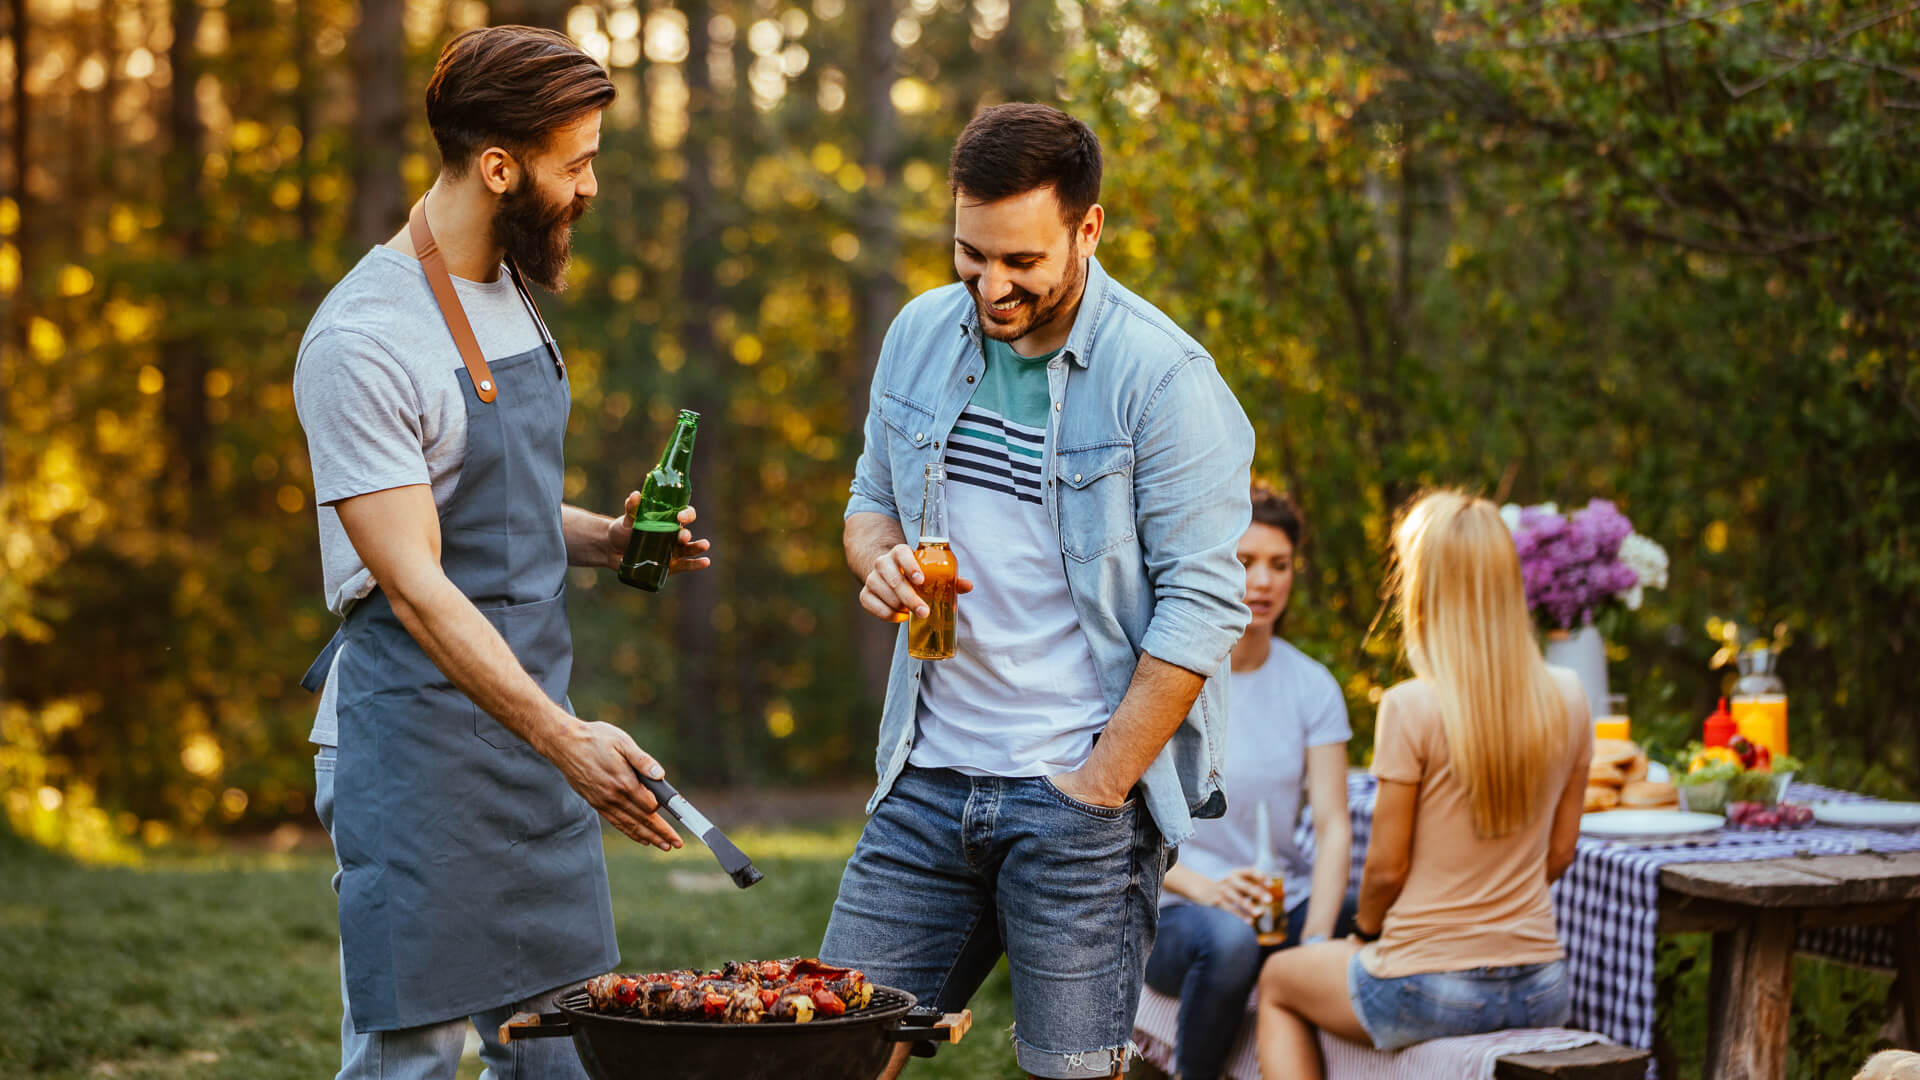 family-friends-barbecuing-iStock-950891664.jpg